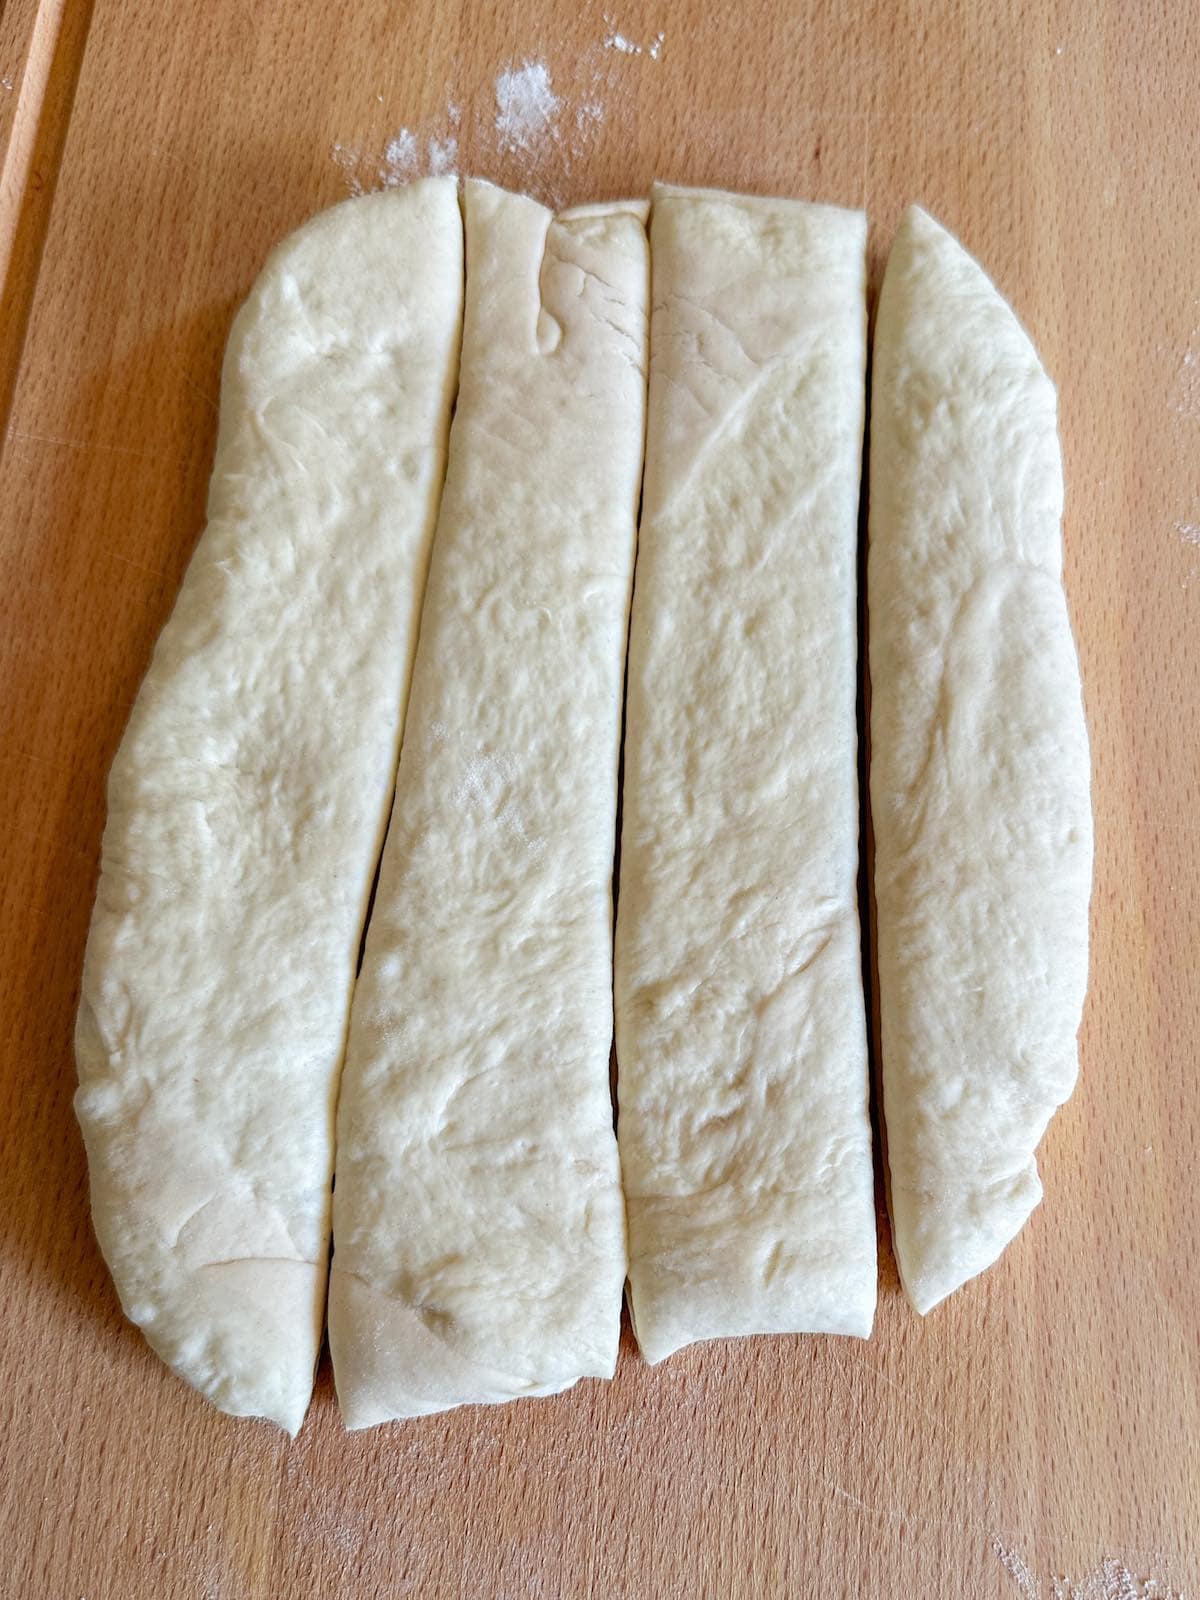 Pizza dough rolled into a rectangle shape and cut into four strips.